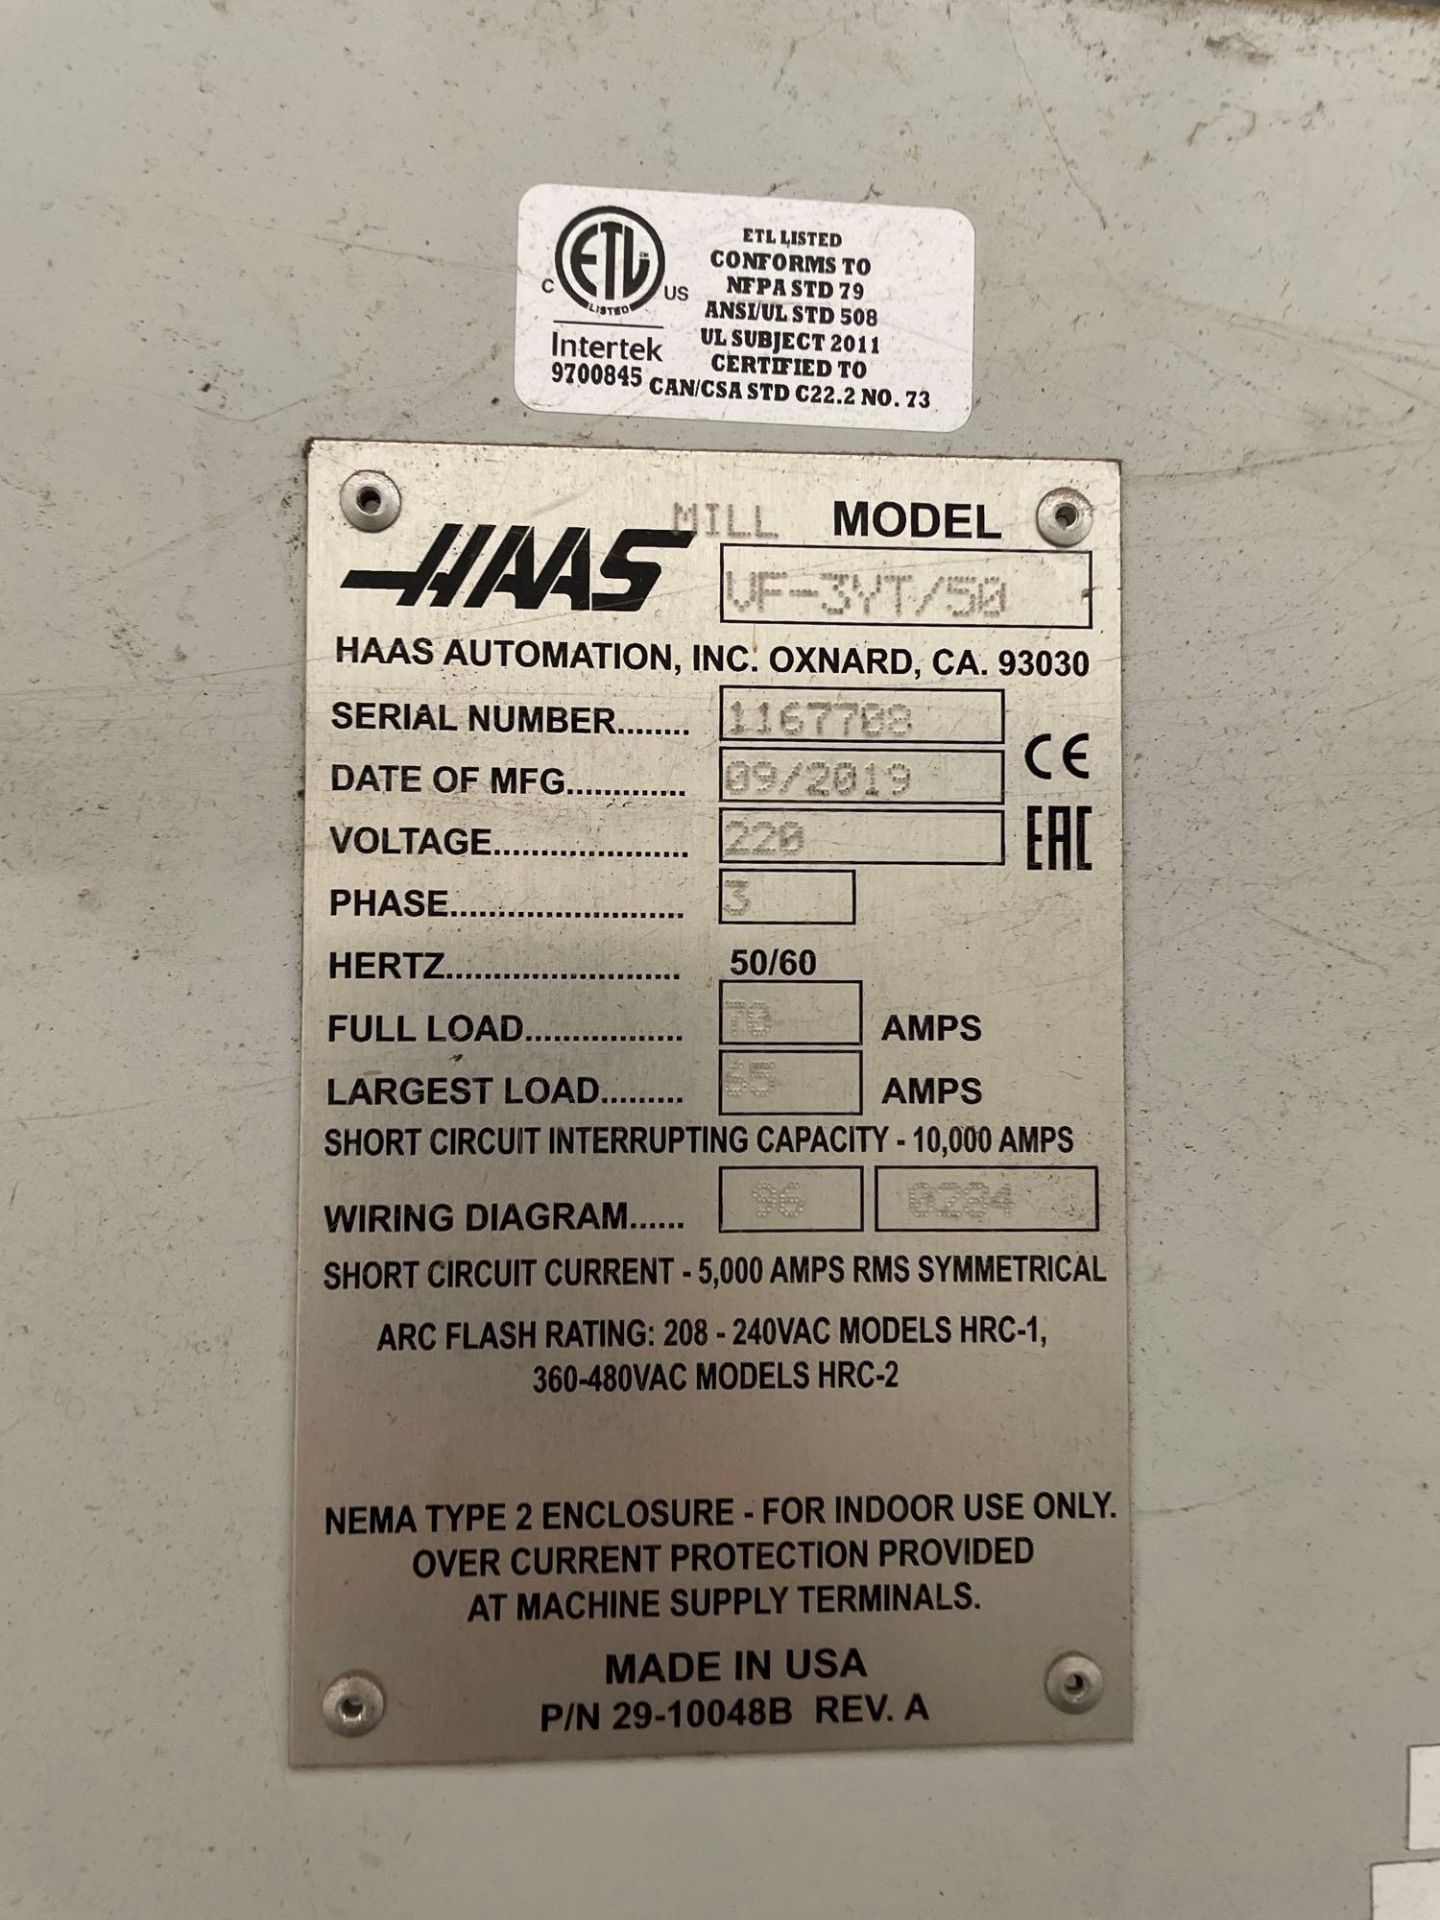 2019, Haas VF 3YT/ 50 Vertical Machining Center, VMC, S/N 1167708 - Image 21 of 42